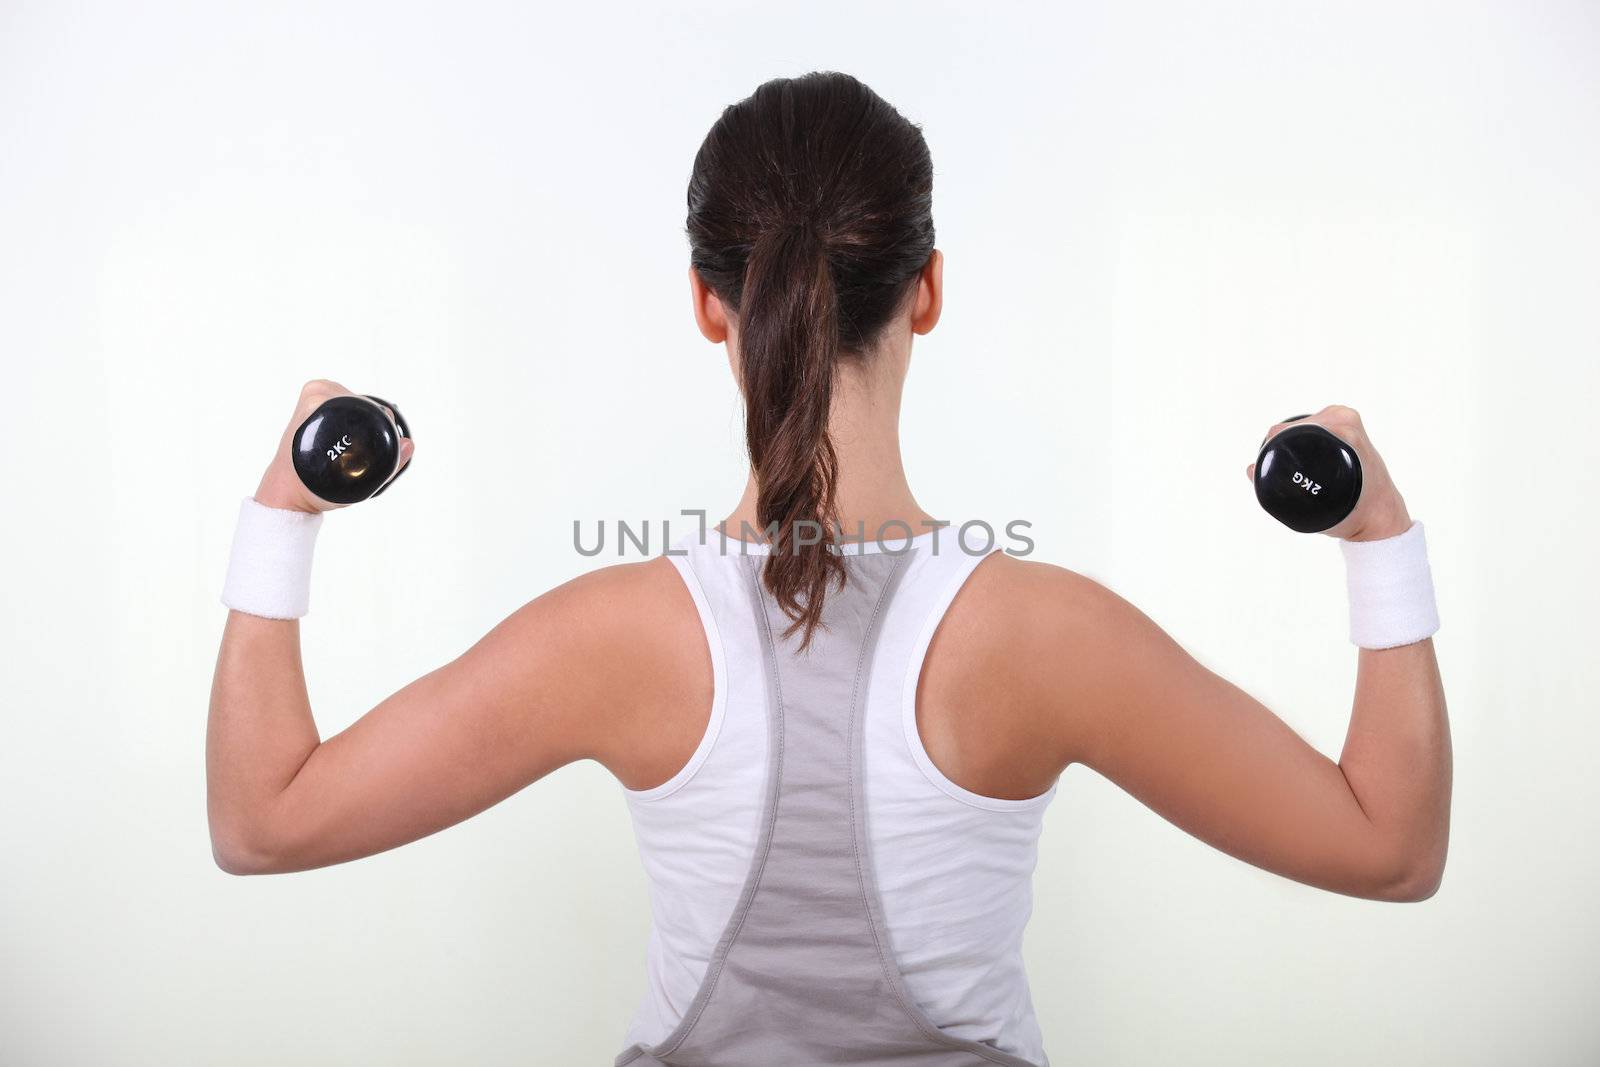 Woman lifting weights by phovoir